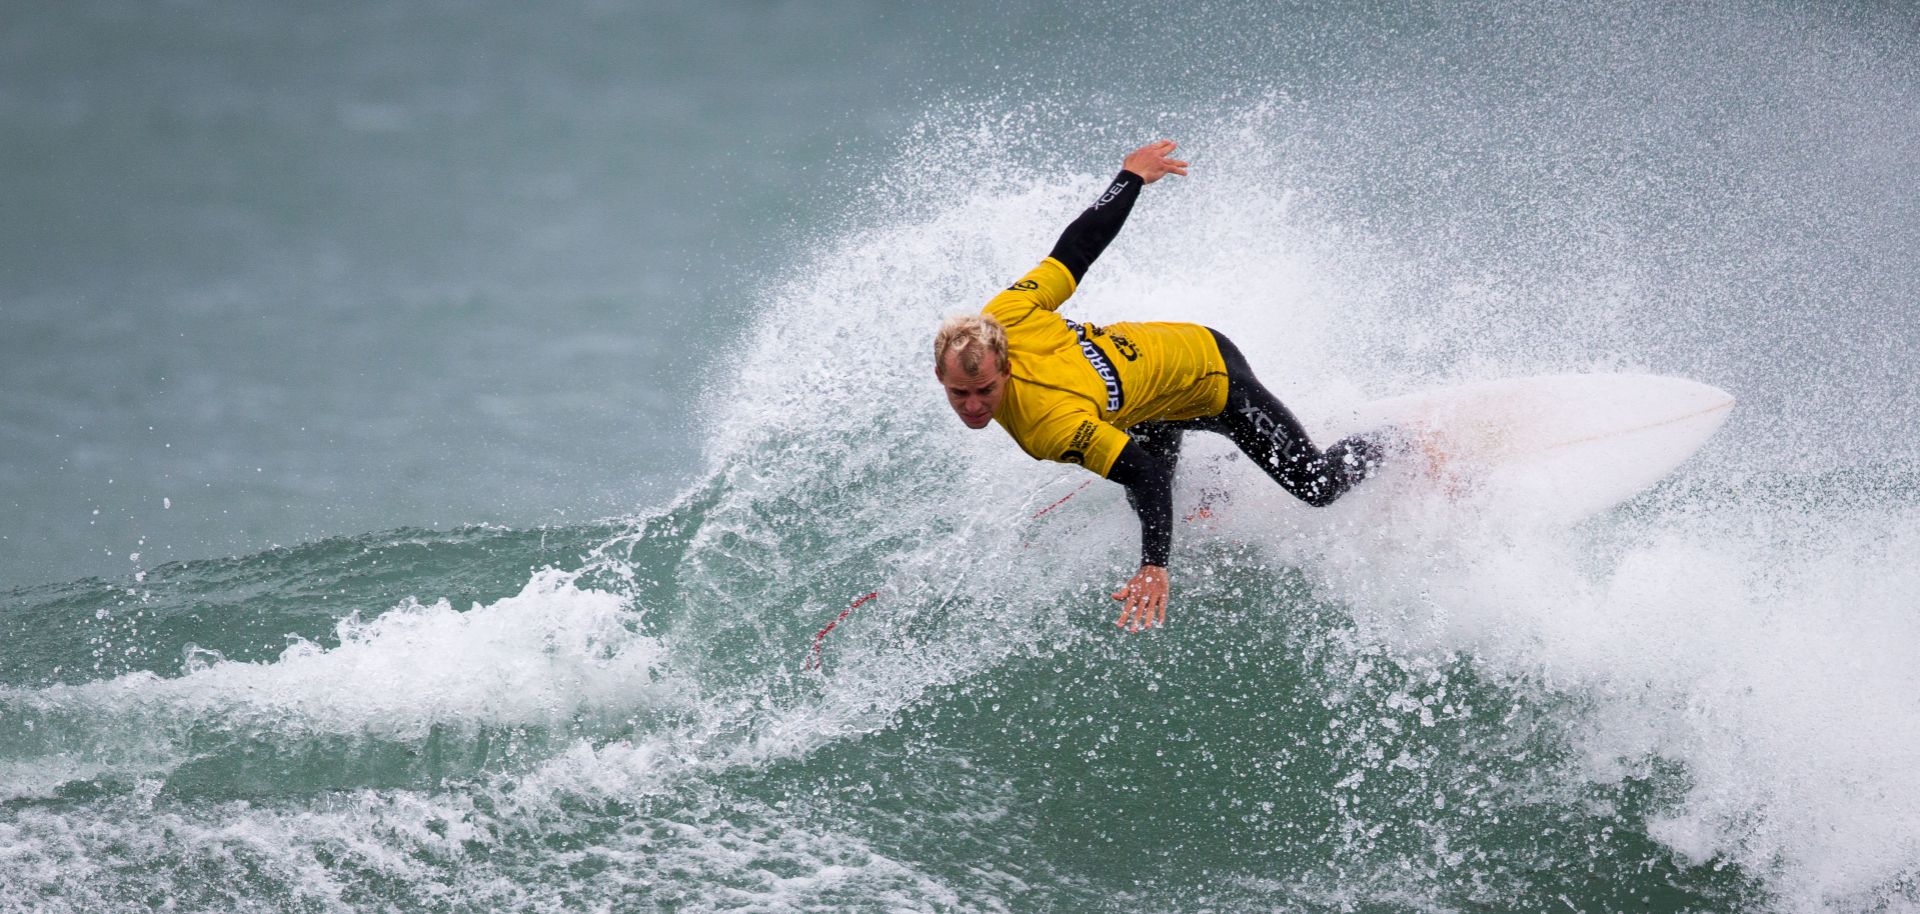 A surfer competes in Cornwall, England.